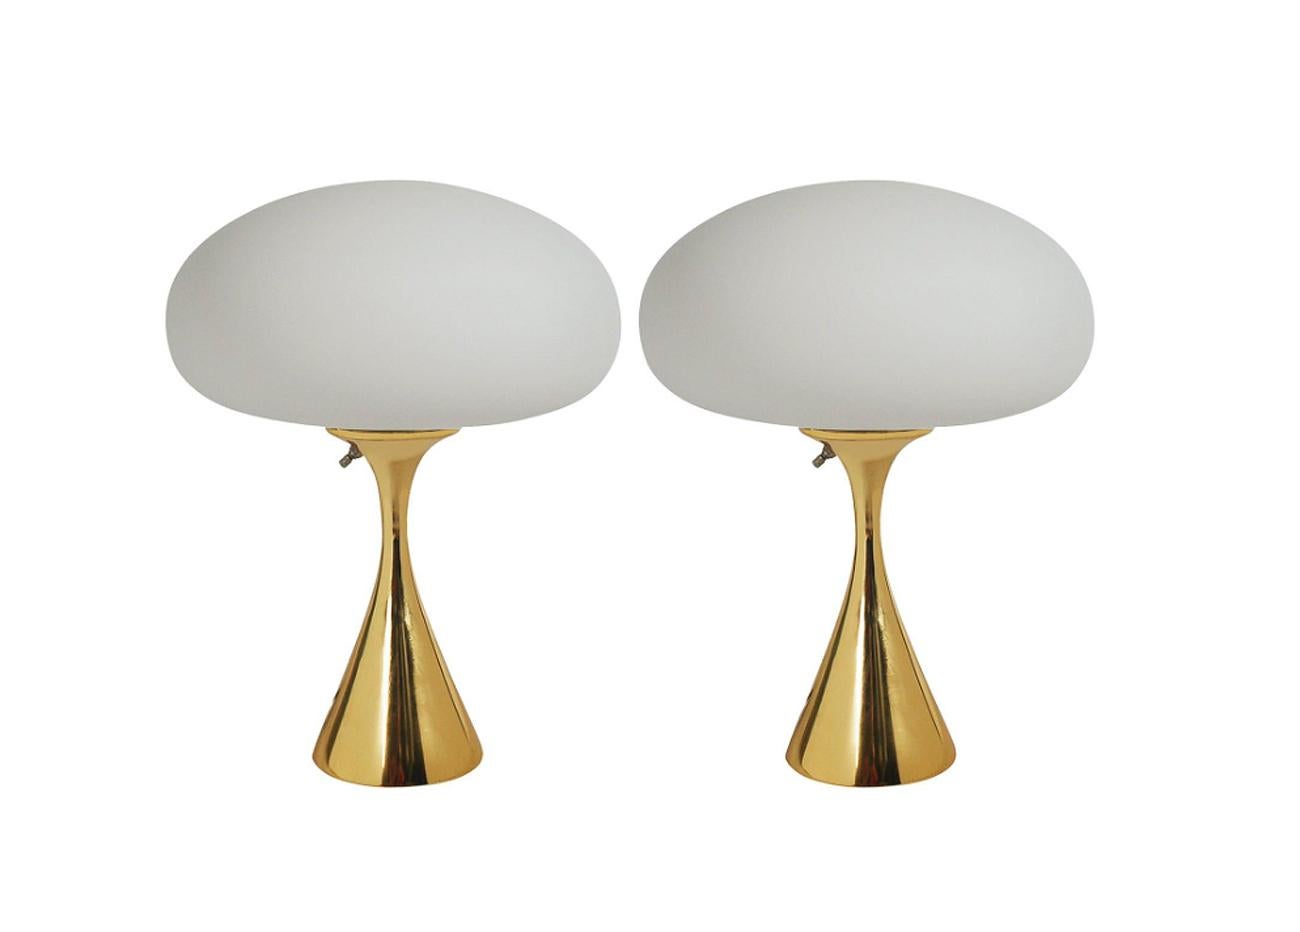 Contemporary Pair of Mid-Century Modern Table Lamps by Designline in Brass & White Glass